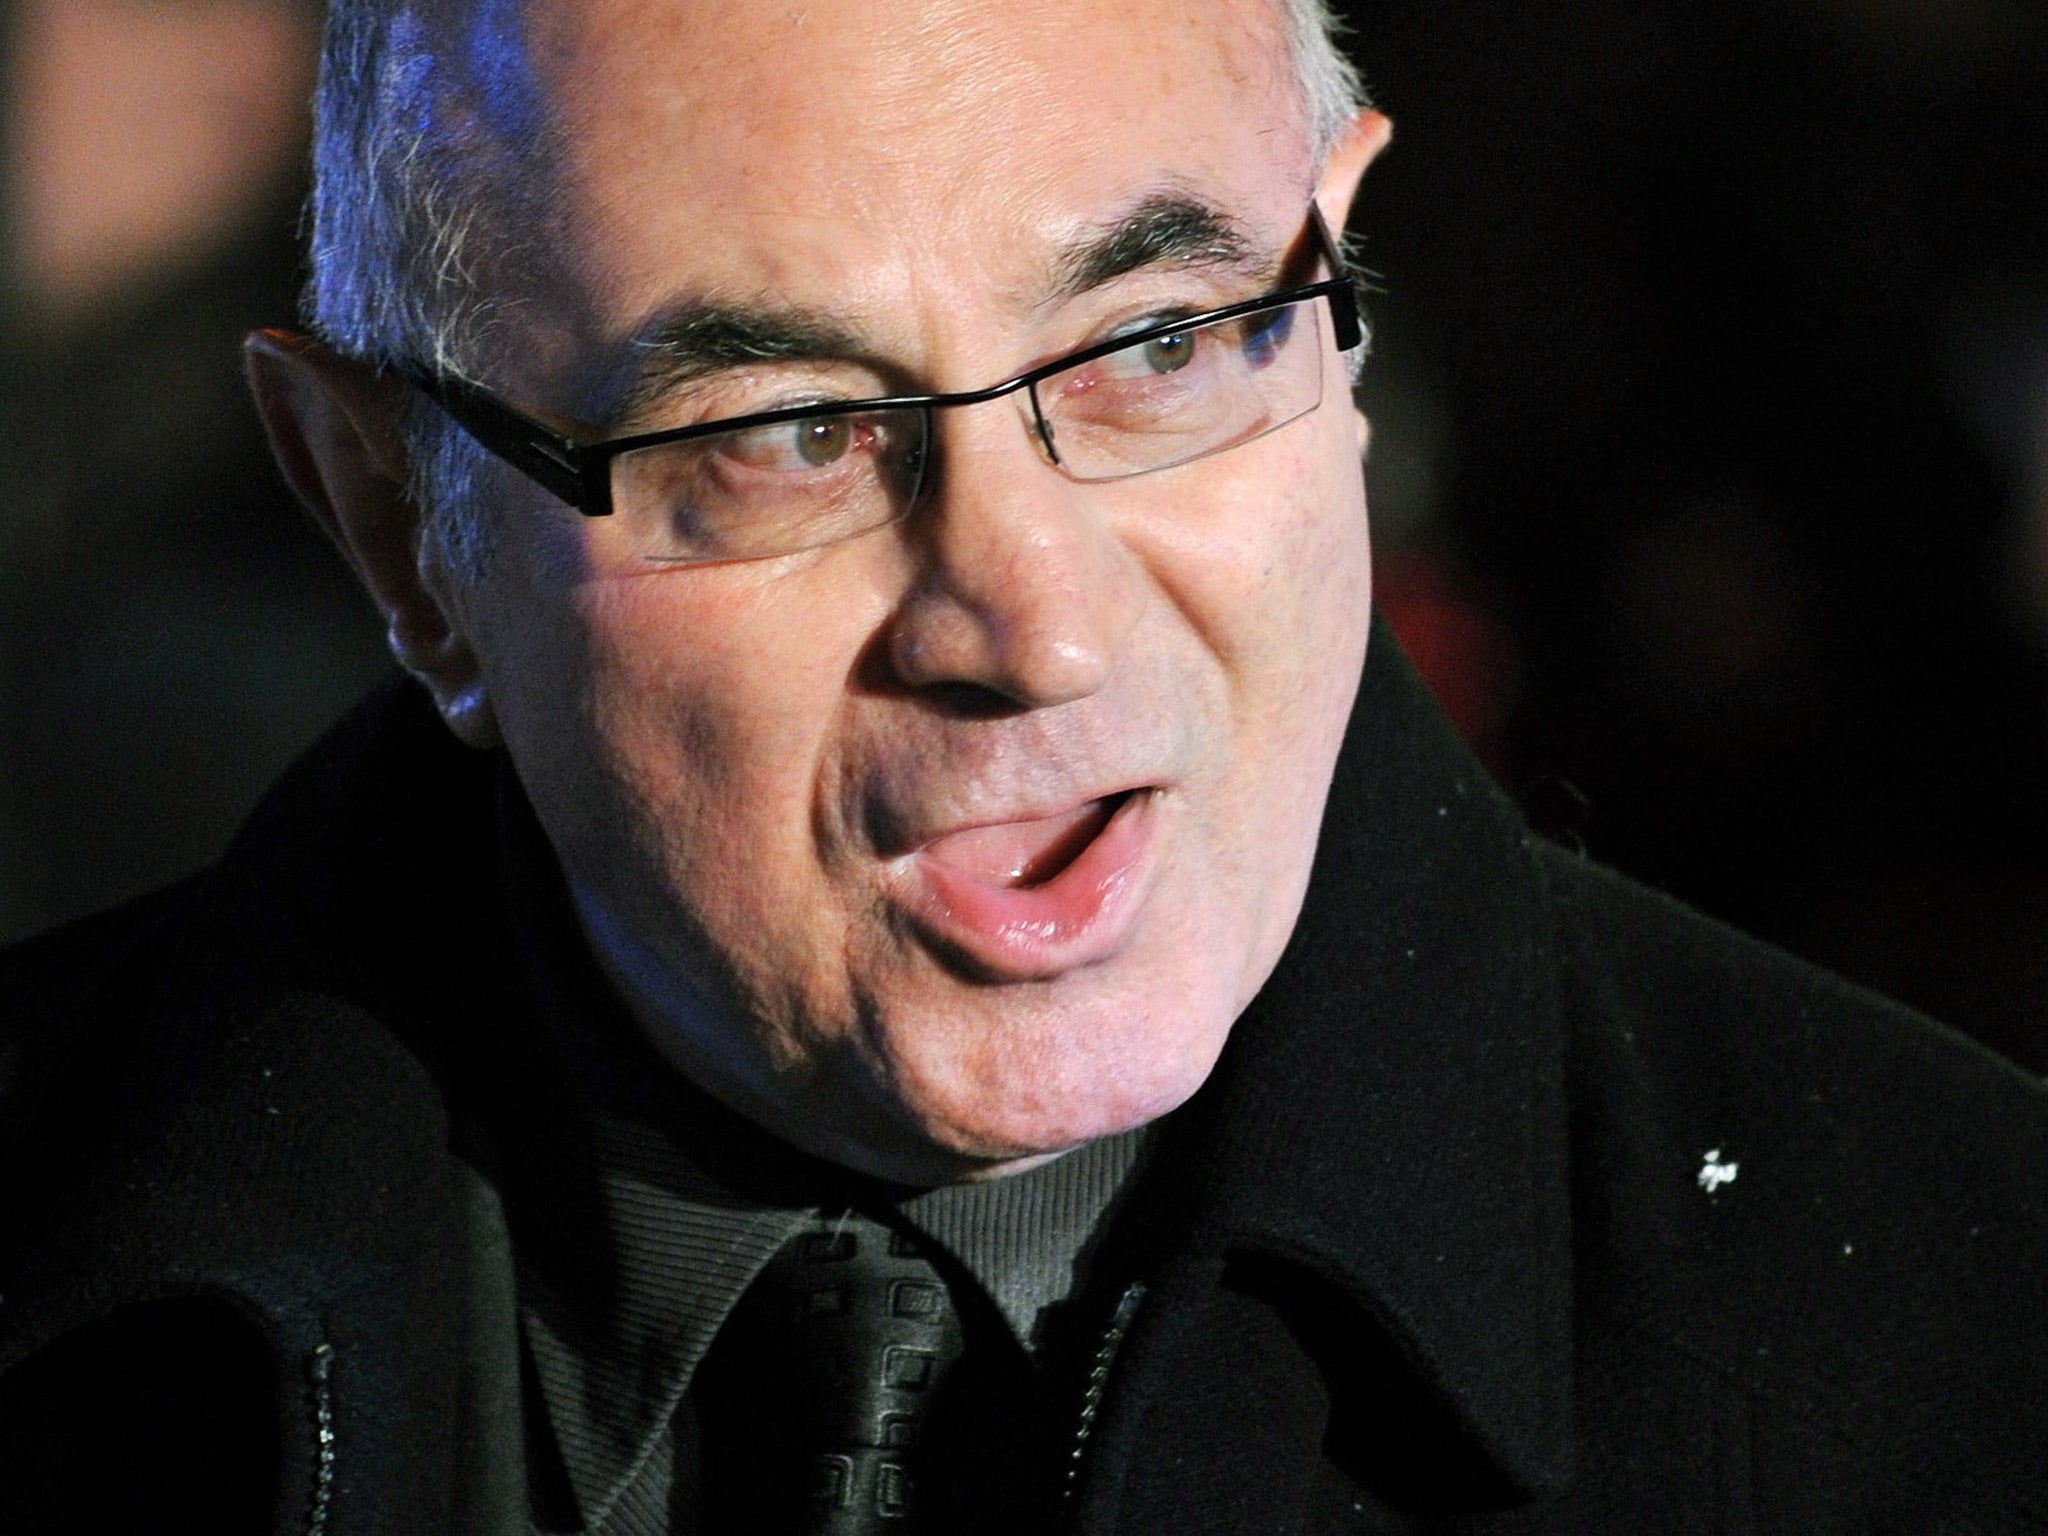 Bob Hoskins died at the age of 71 after suffering from pneumonia